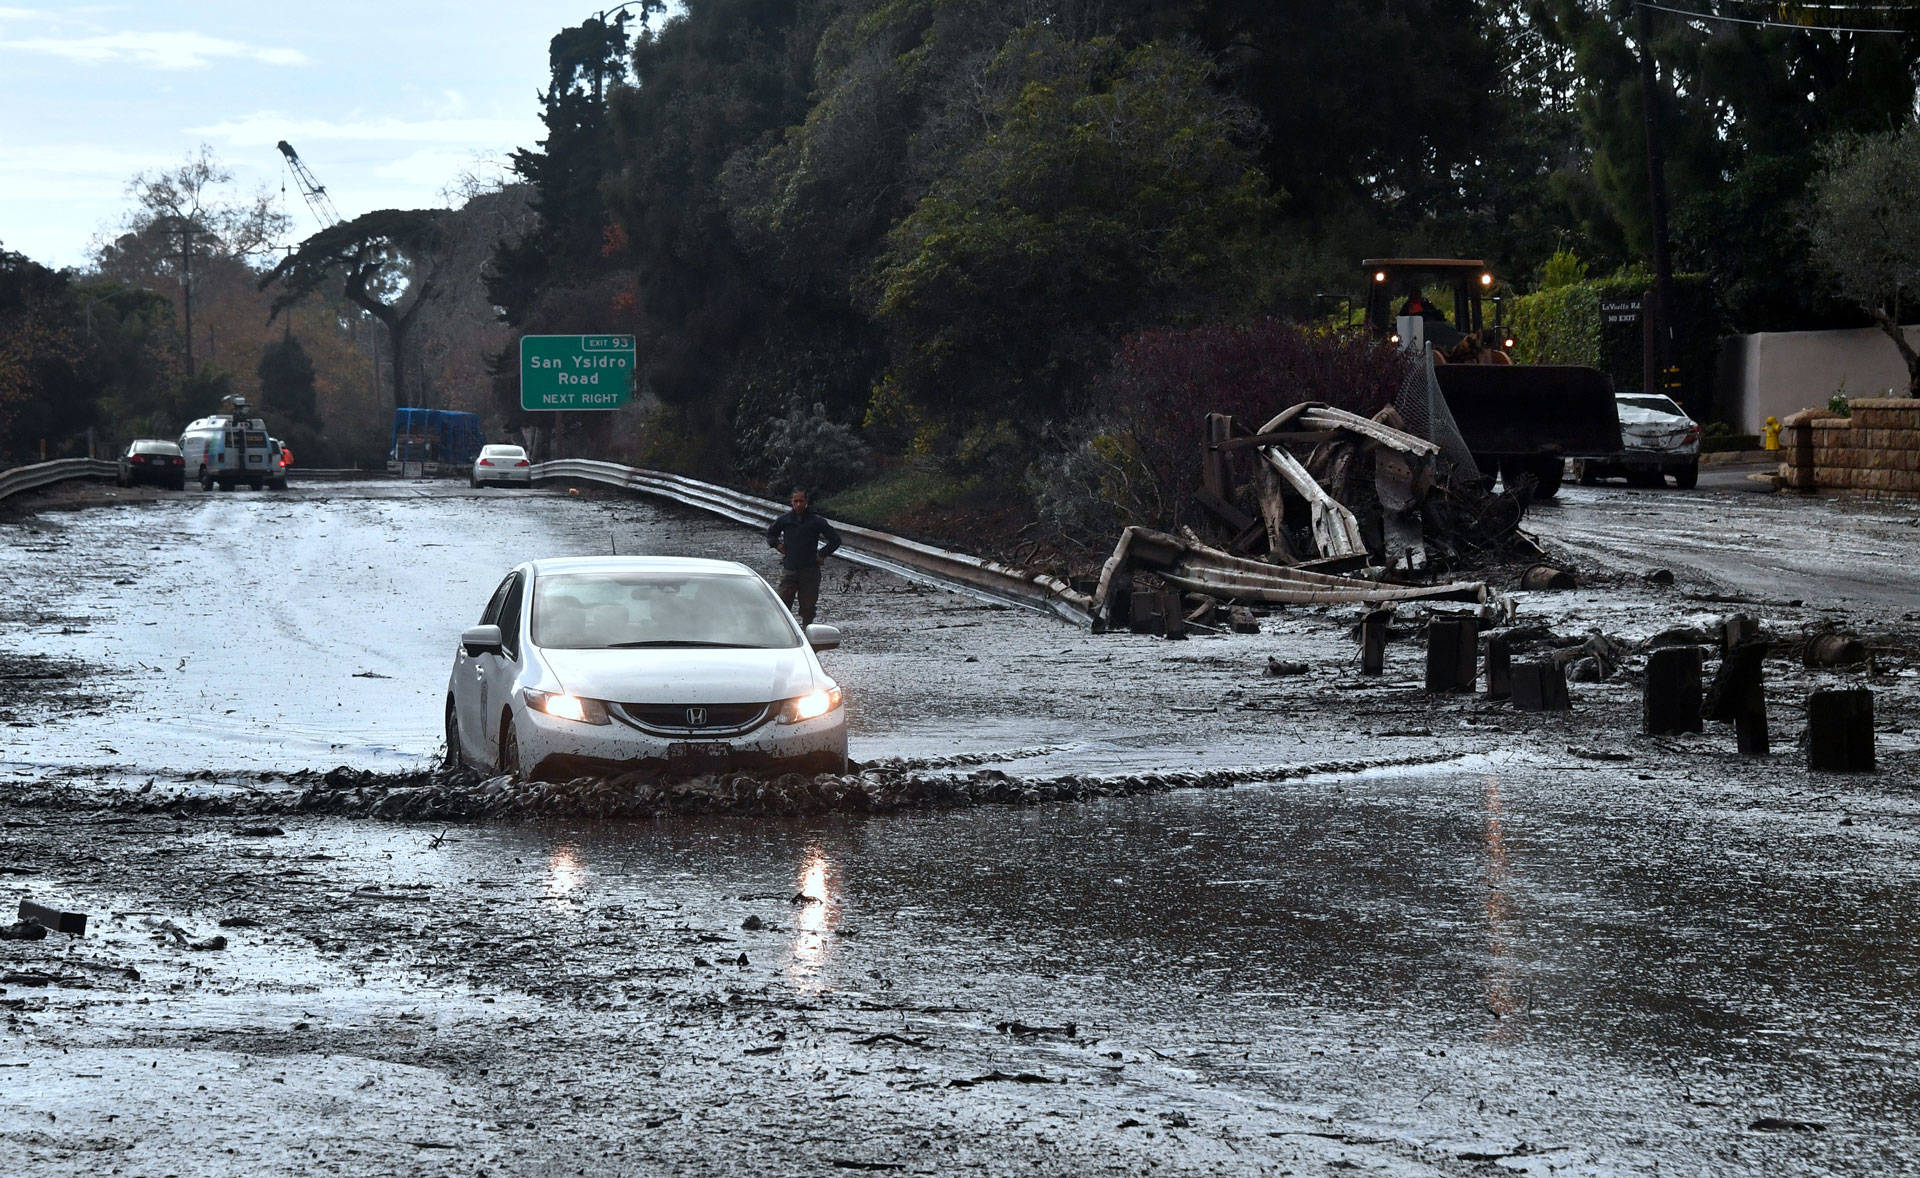 A vehicle drives across the flooded US 101 freeway in Montecito on January 9, 2018. FREDERIC J. BROWN/AFP/Getty Images